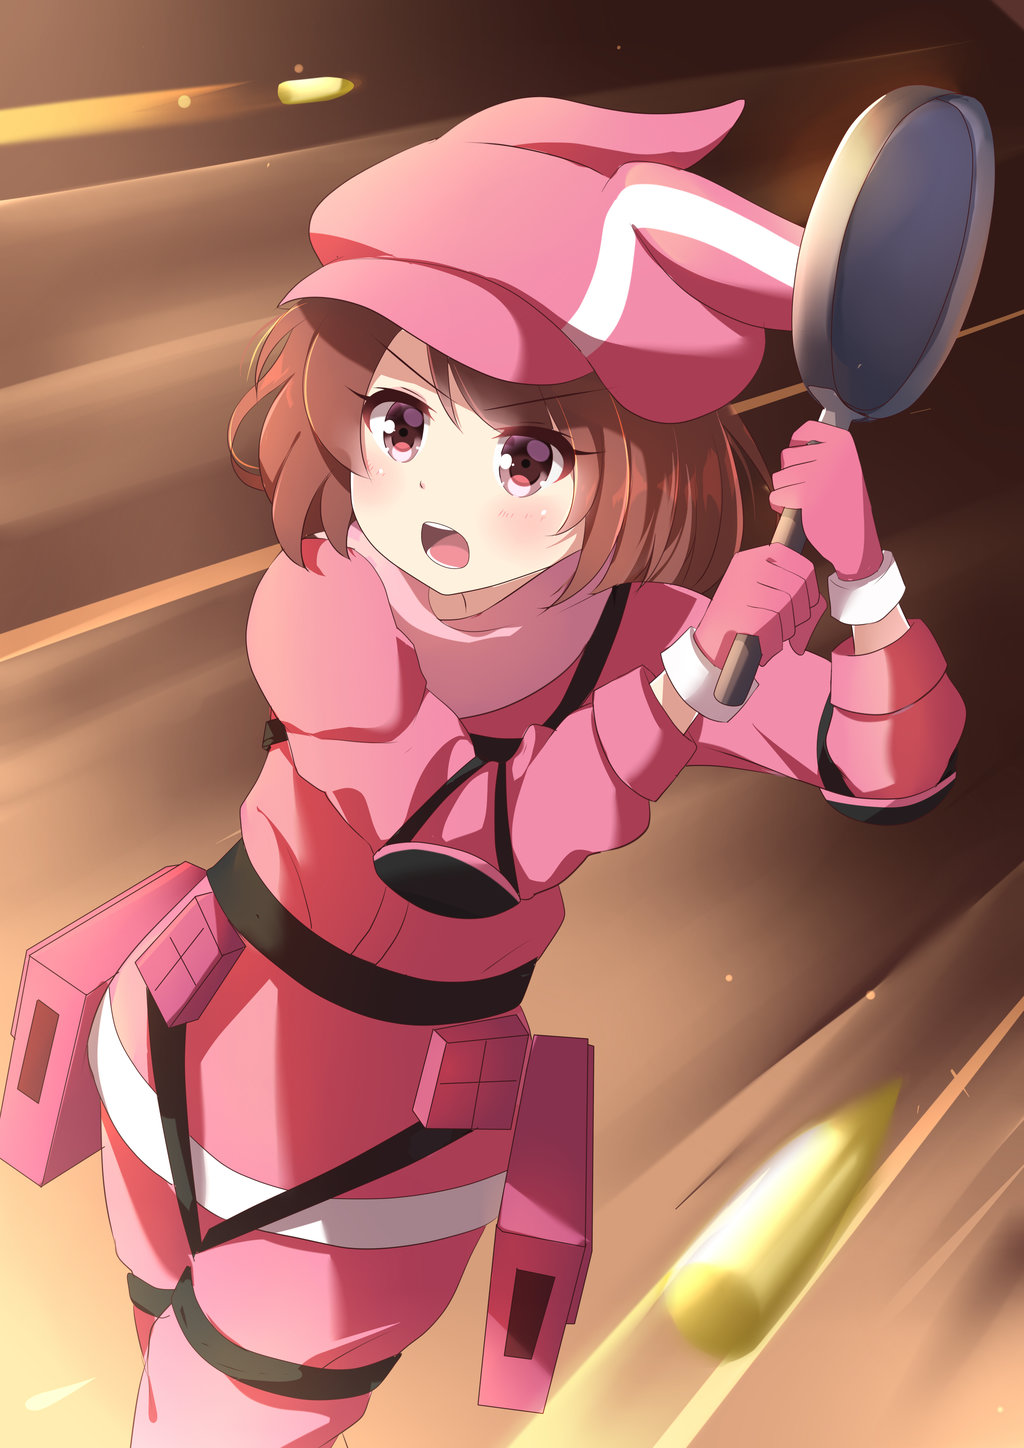 1girl agung_syaeful_anwar animal_ears animal_hat bangs blush brown_hair bullet bunny_hat cabbie_hat commentary commentary_request eyebrows_visible_through_hair frying_pan gloves hat highres holding jacket llenn_(sao) open_mouth pants pink_gloves pink_hat pink_jacket pink_pants rabbit_ears red_eyes solo sword_art_online sword_art_online_alternative:_gun_gale_online v-shaped_eyebrows